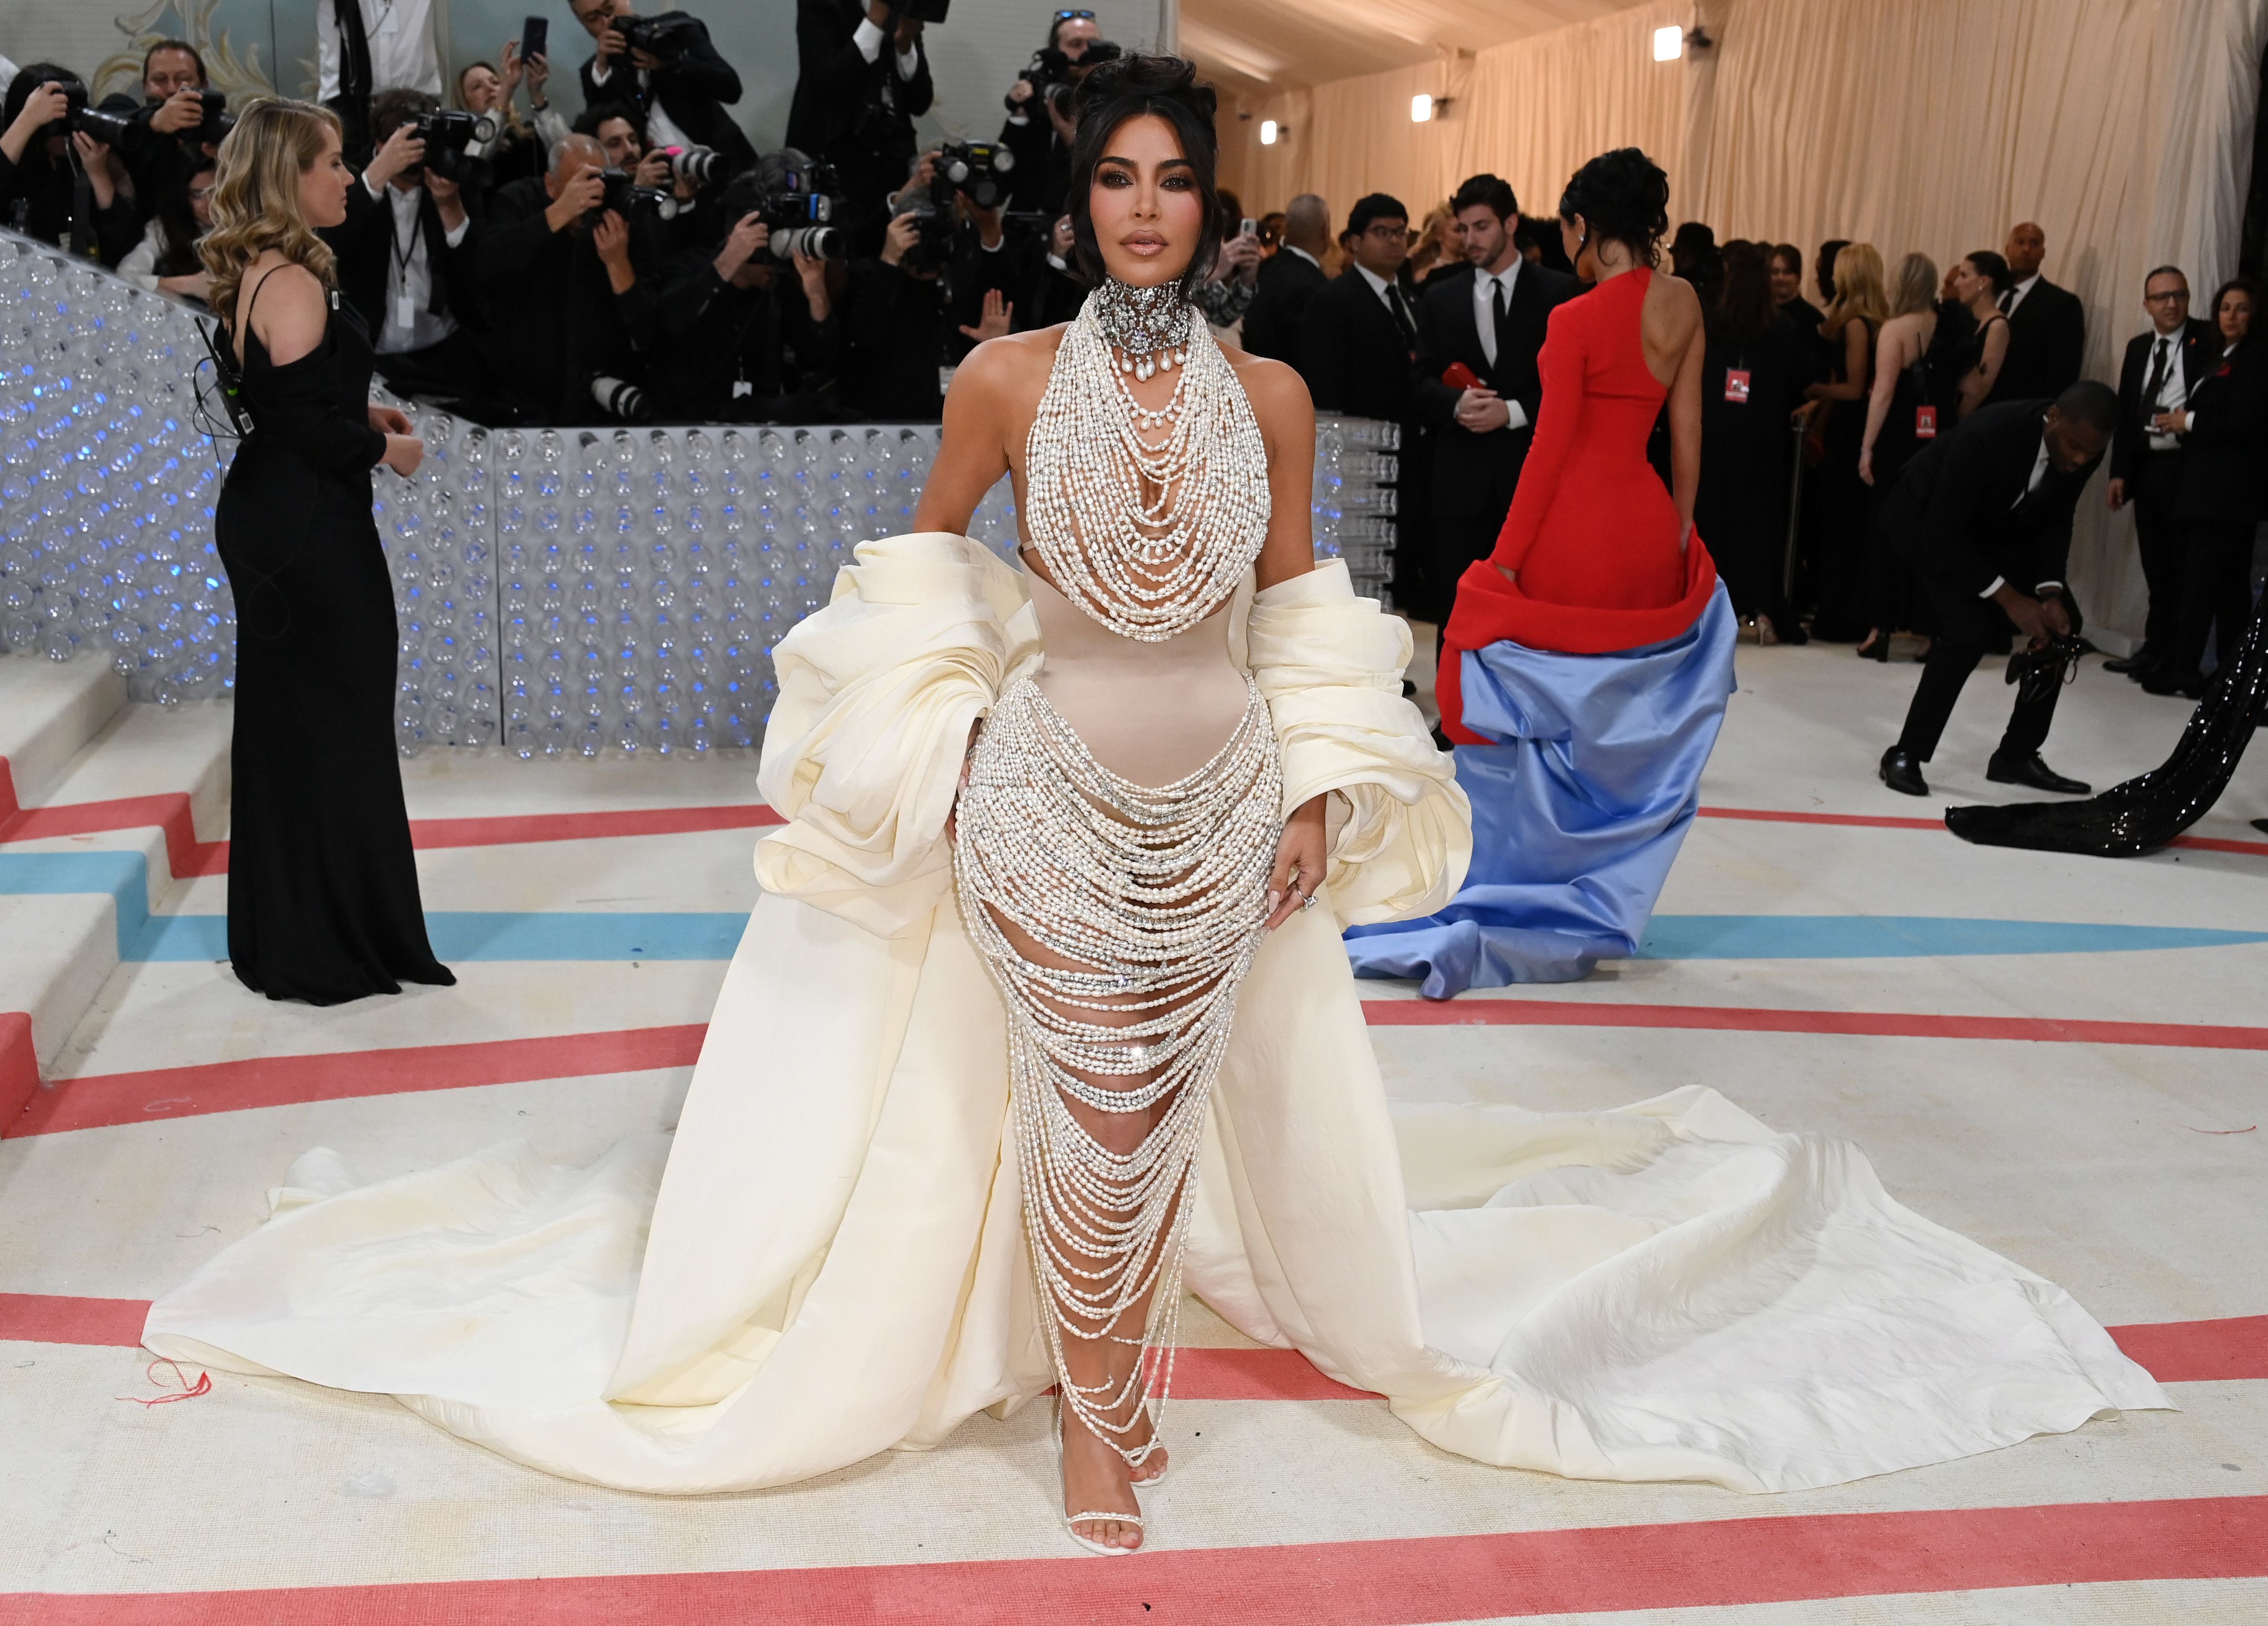 Met Gala: Stars' First Looks They Ever Wore